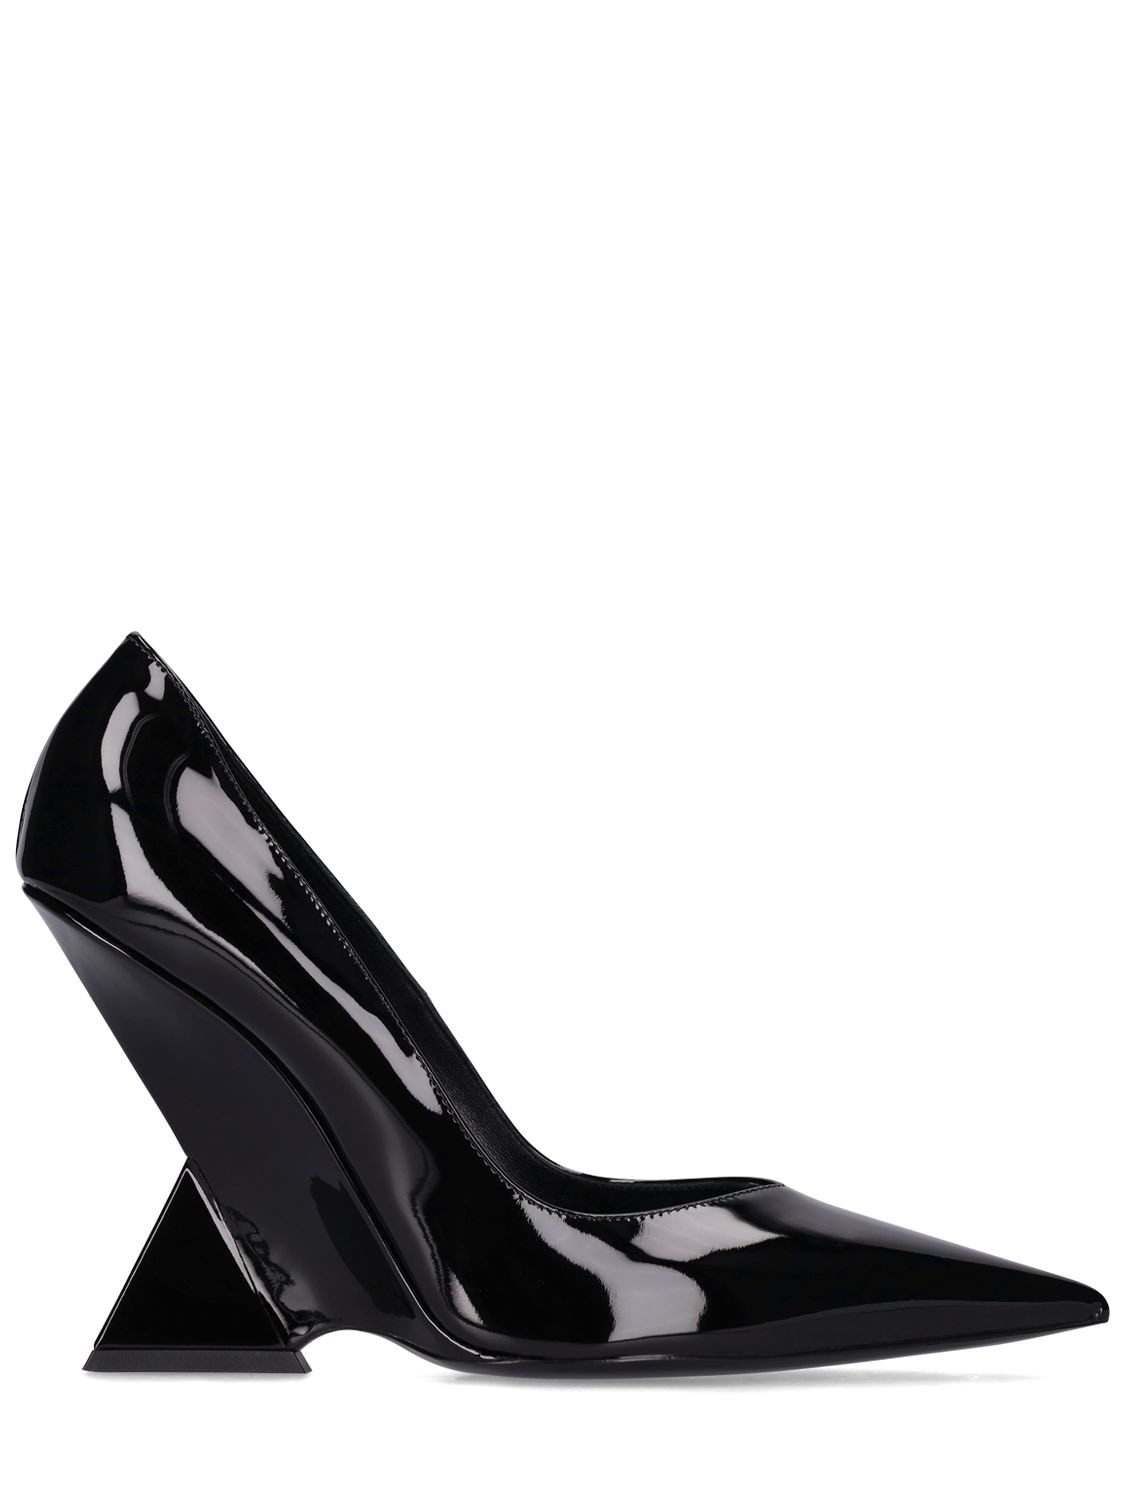 Image of 105mm Cheope Patent Leather Pumps